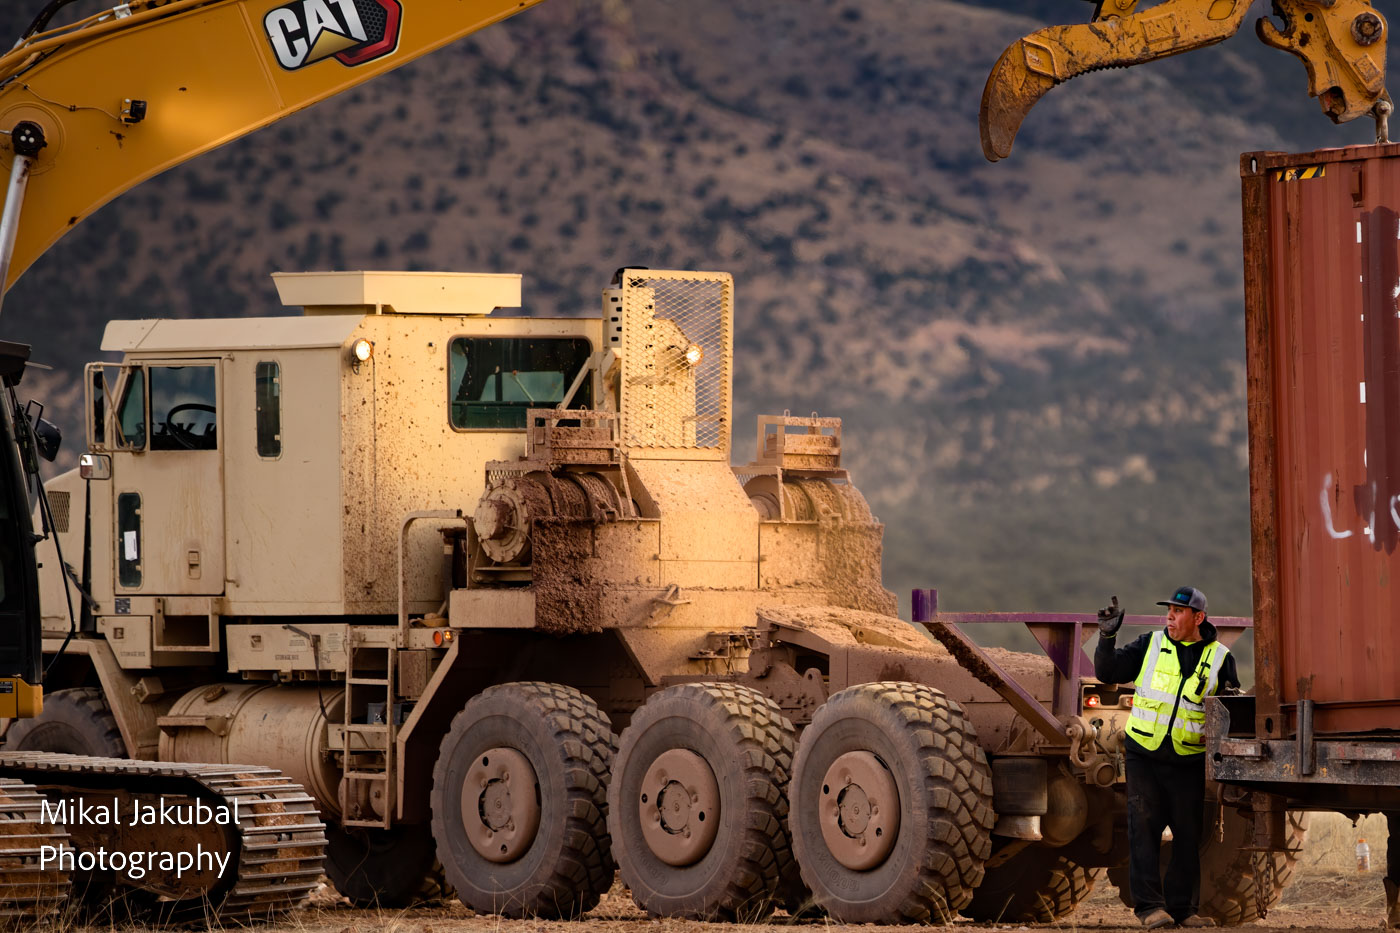 A worker in a high-vis vest gives a hand signal to the operator of a large excavator that is lowering a shipping container onto a giant flatbed trailer. The trailer is towed by an 8-wheel, yellow military tractor vehicle.